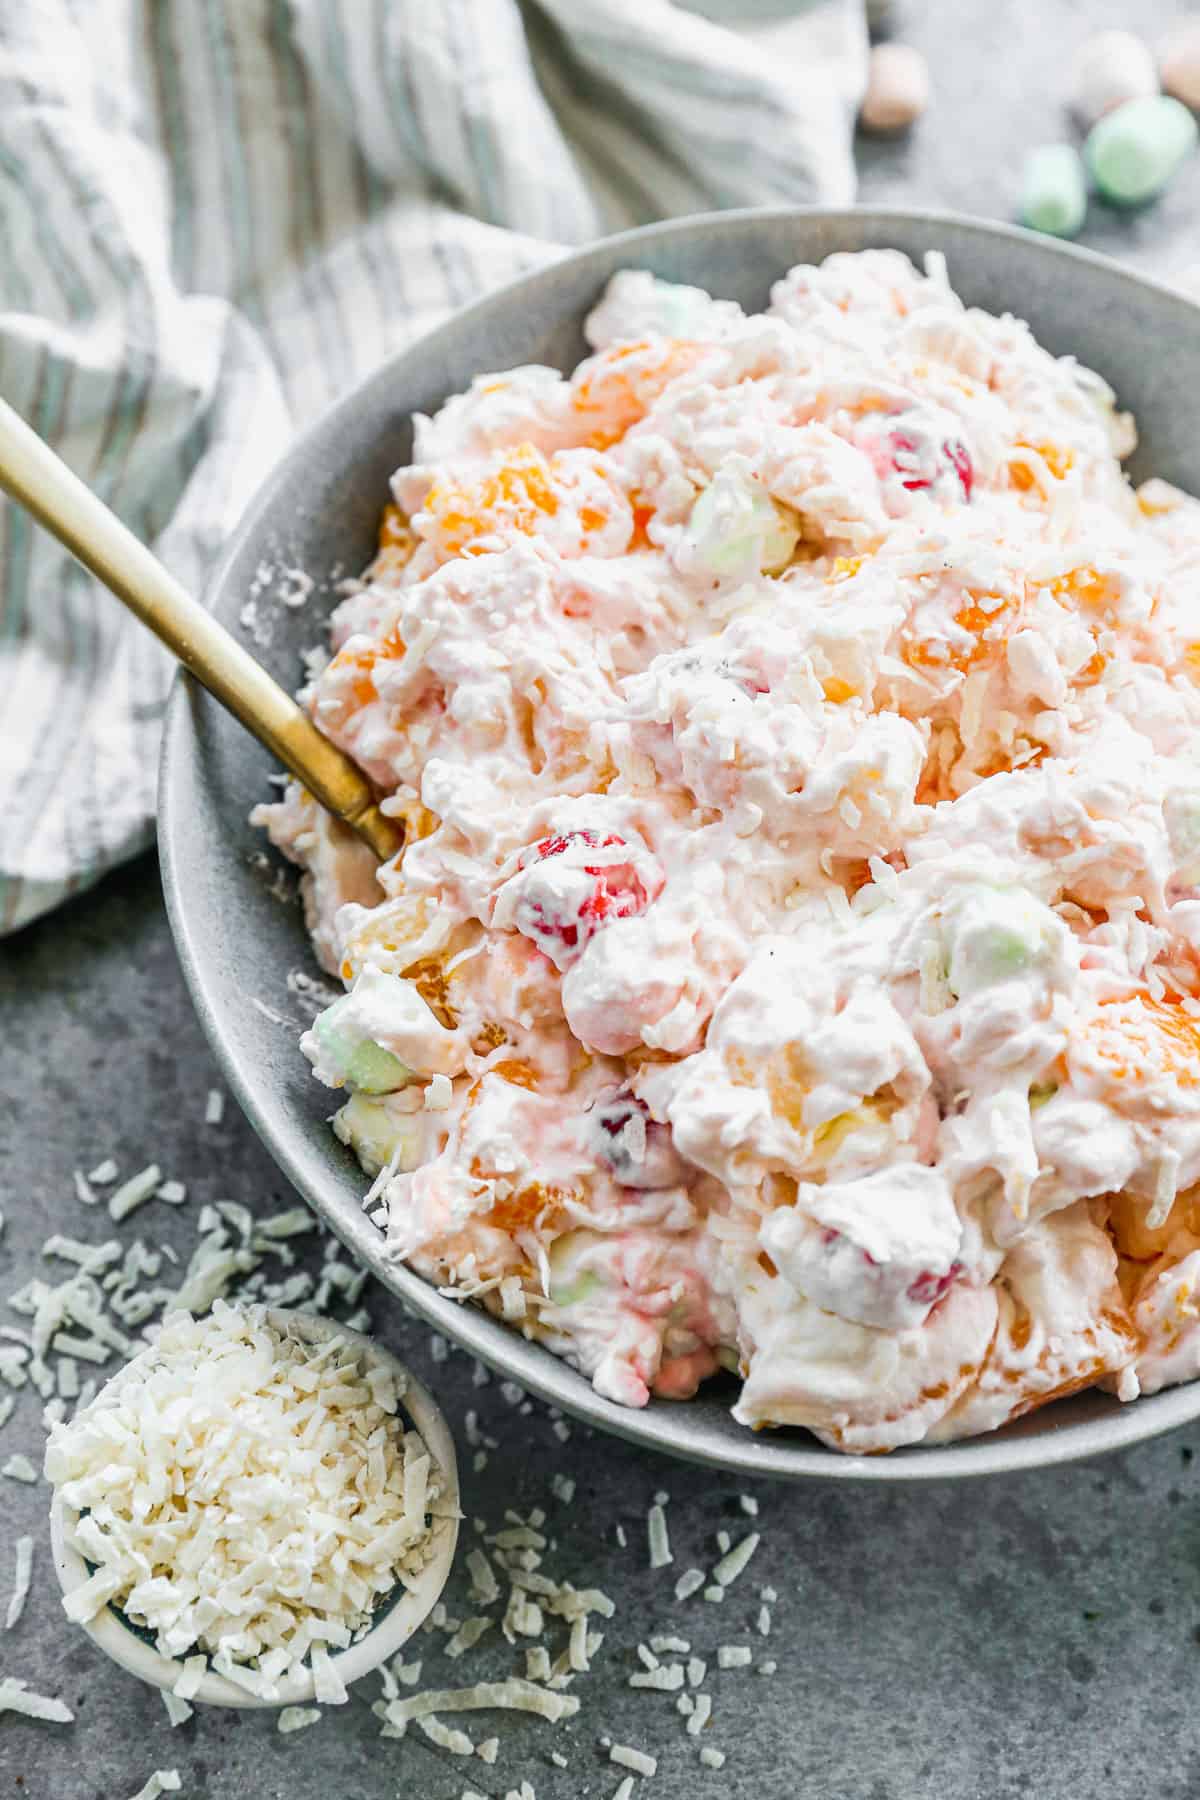 A close up image of Ambrosia salad in a large serving bowl, ready to enjoy.